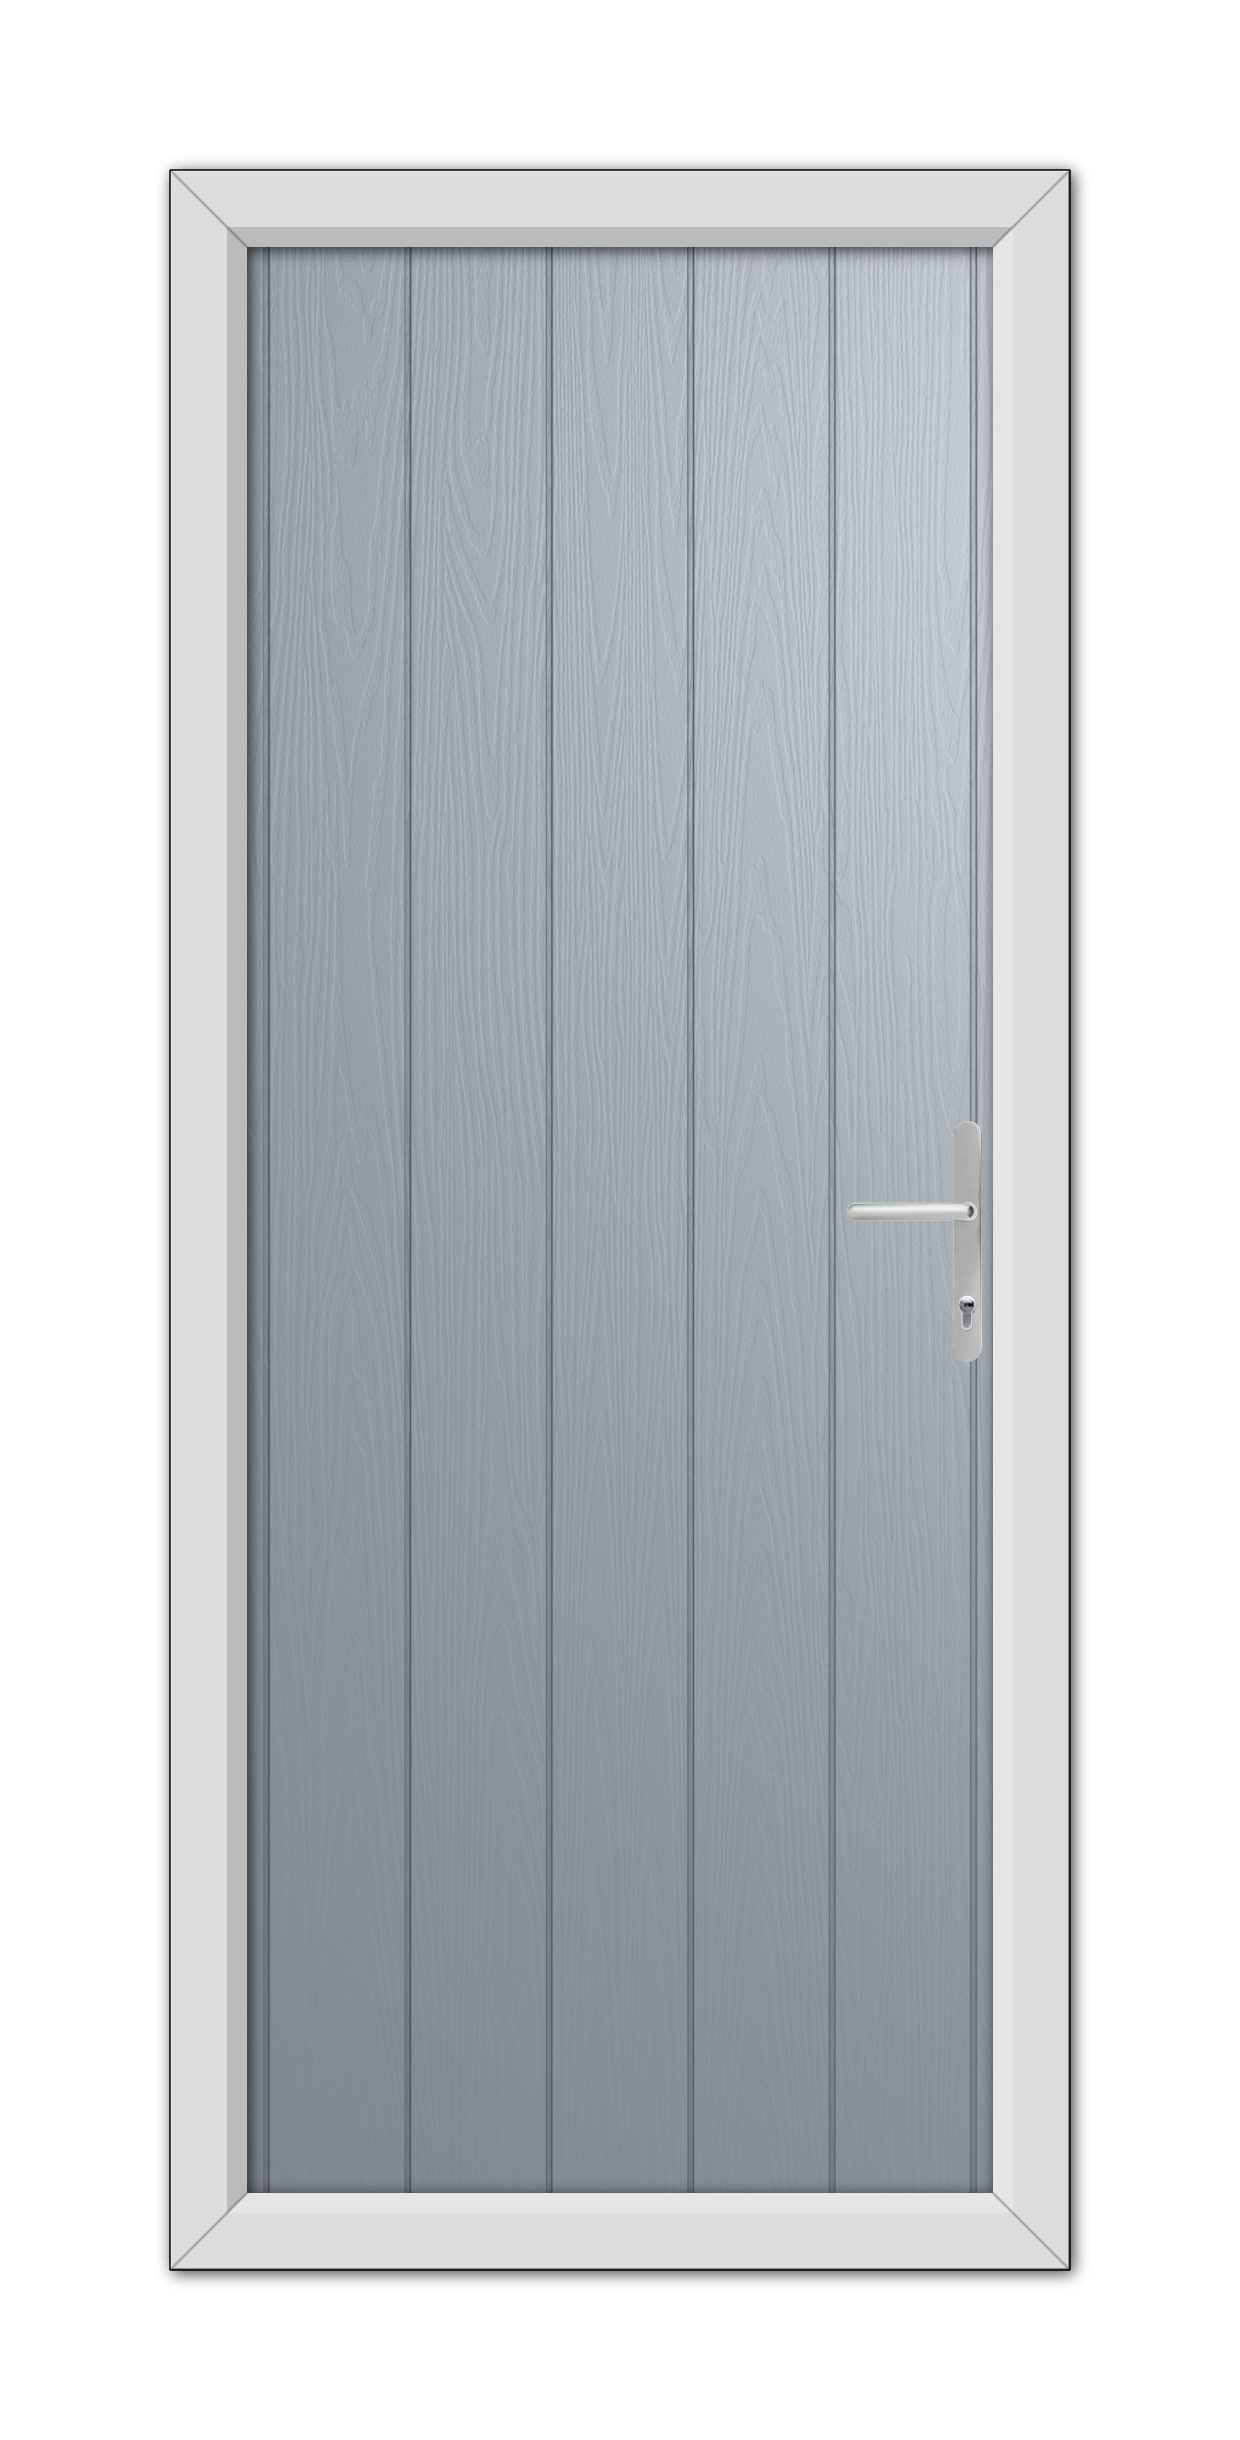 A modern French Grey Norfolk Solid Composite Door 48mm Timber Core with a simple silver handle, set within a white frame, depicted on a plain background.